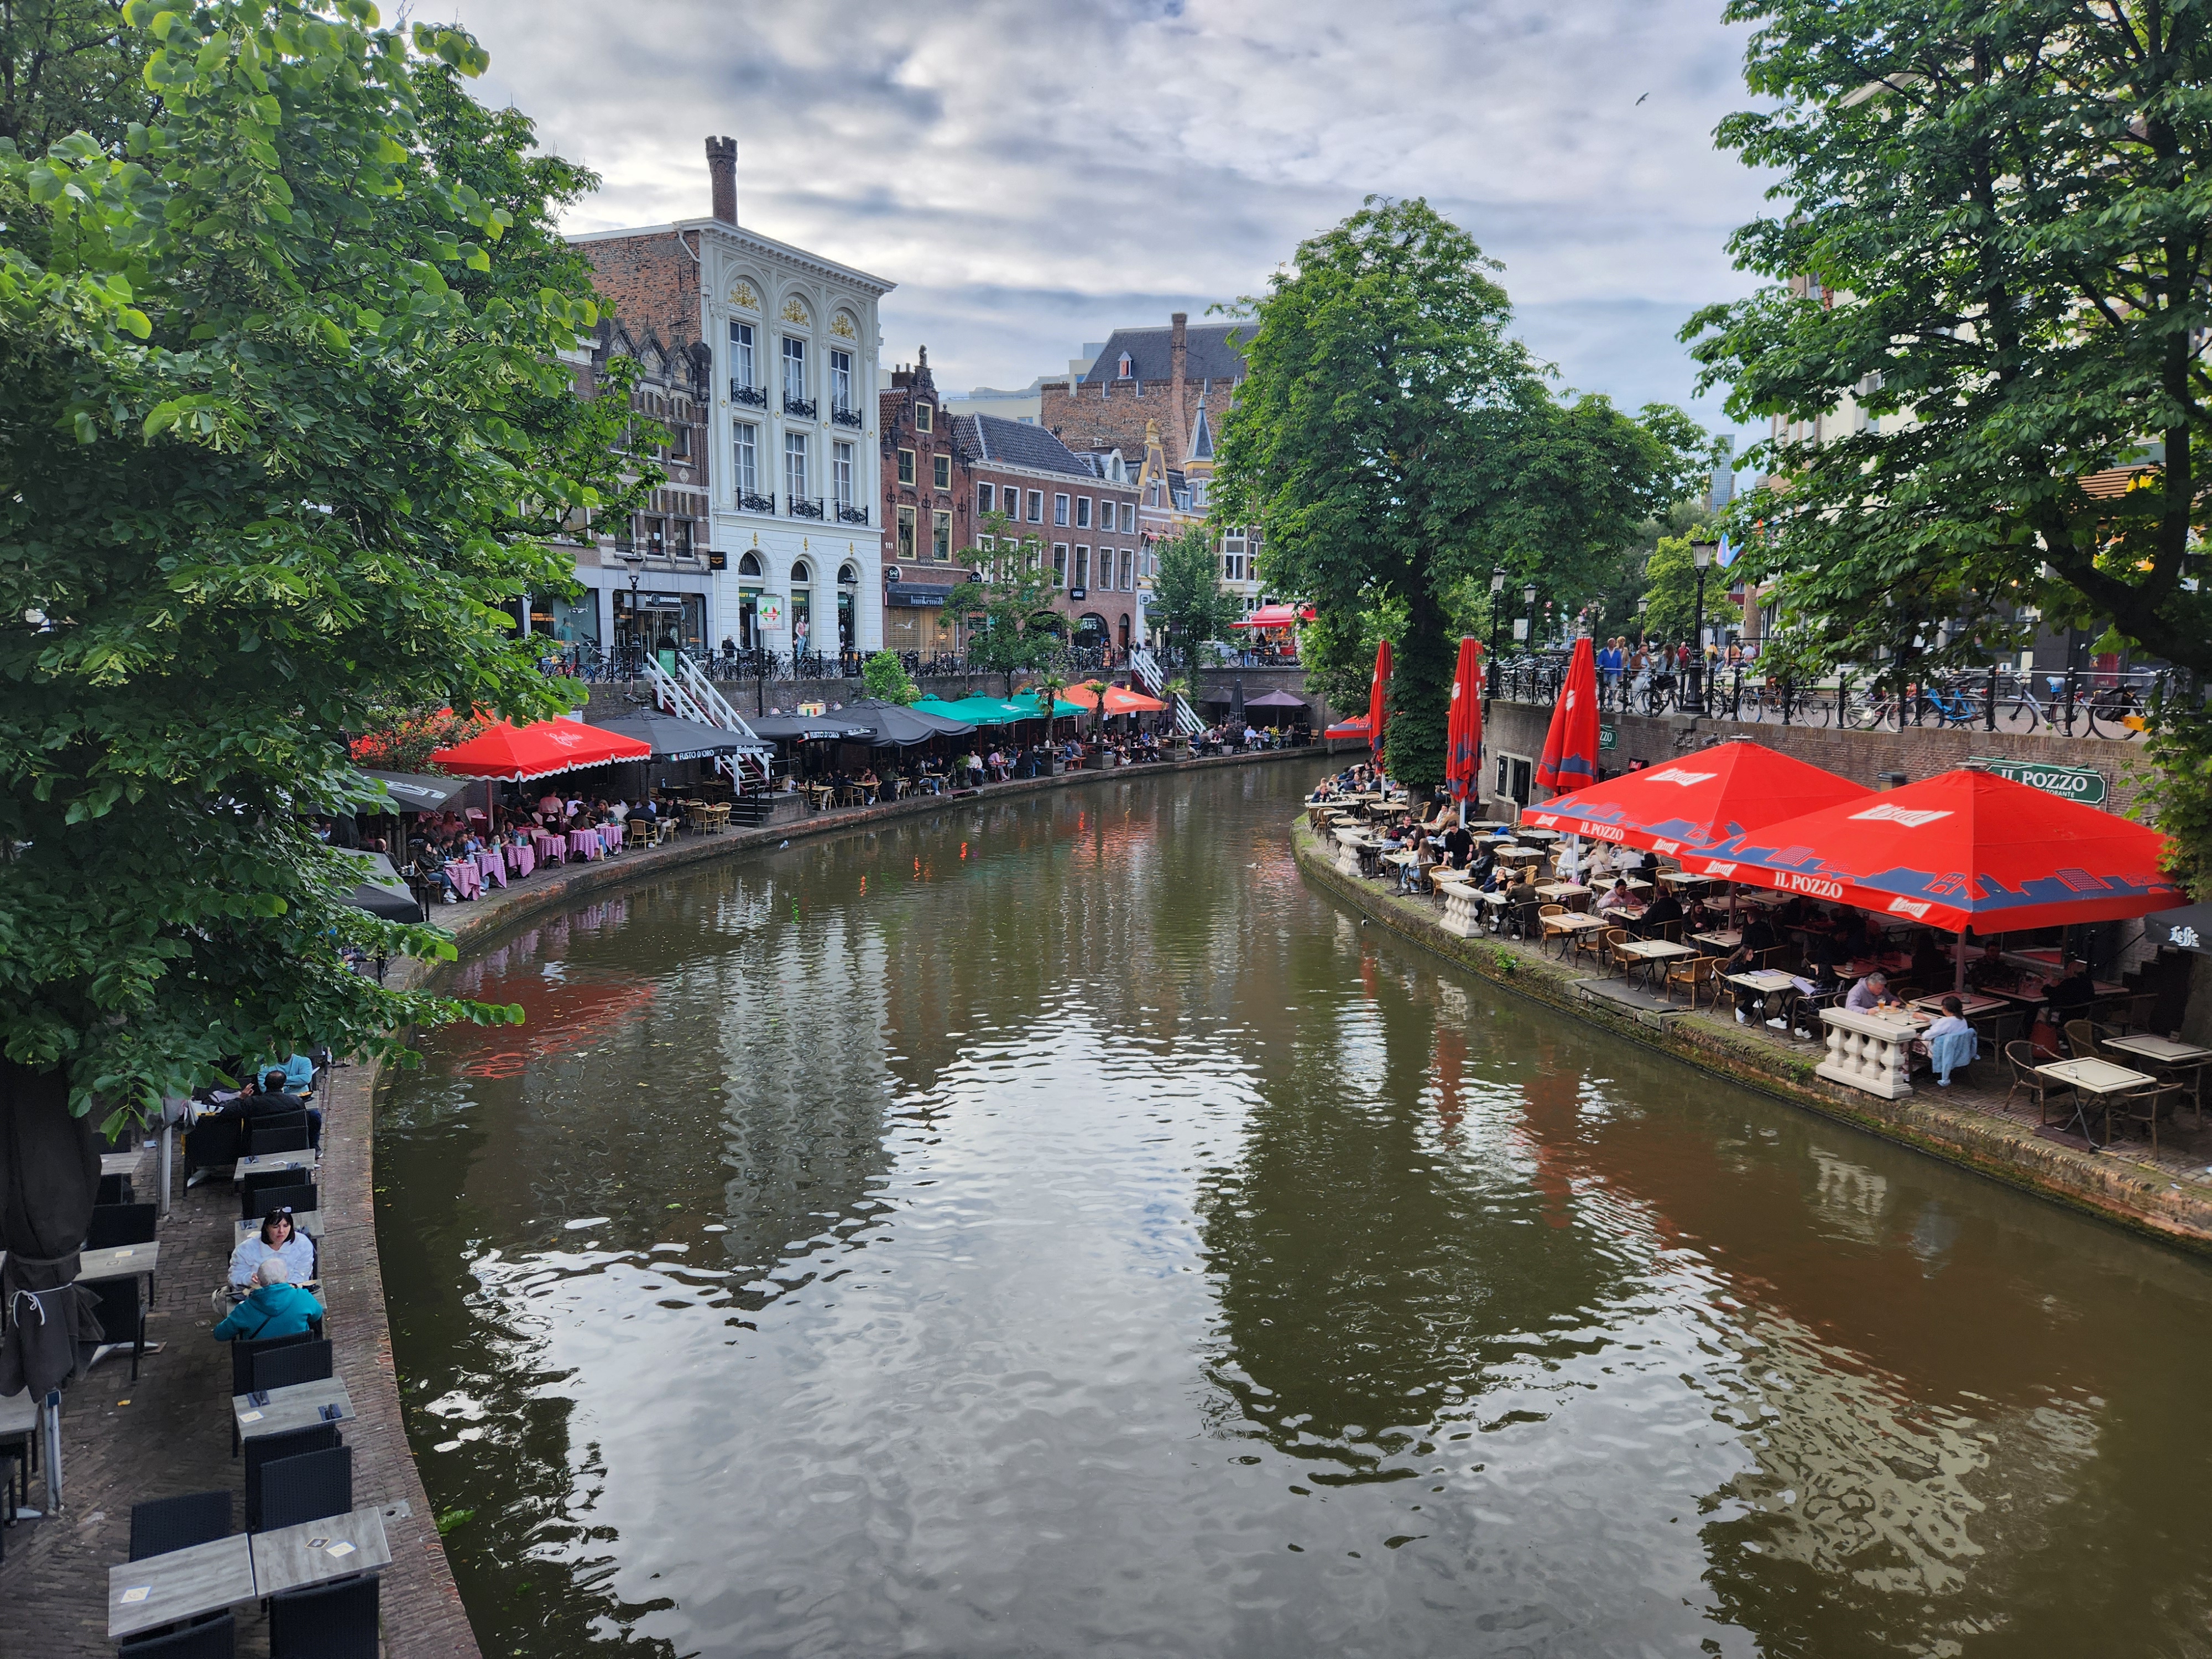 Utrecht city centre, the canal is lower with a bank full of cafe tables and umbrellas, there is then a higher street level with old buildings